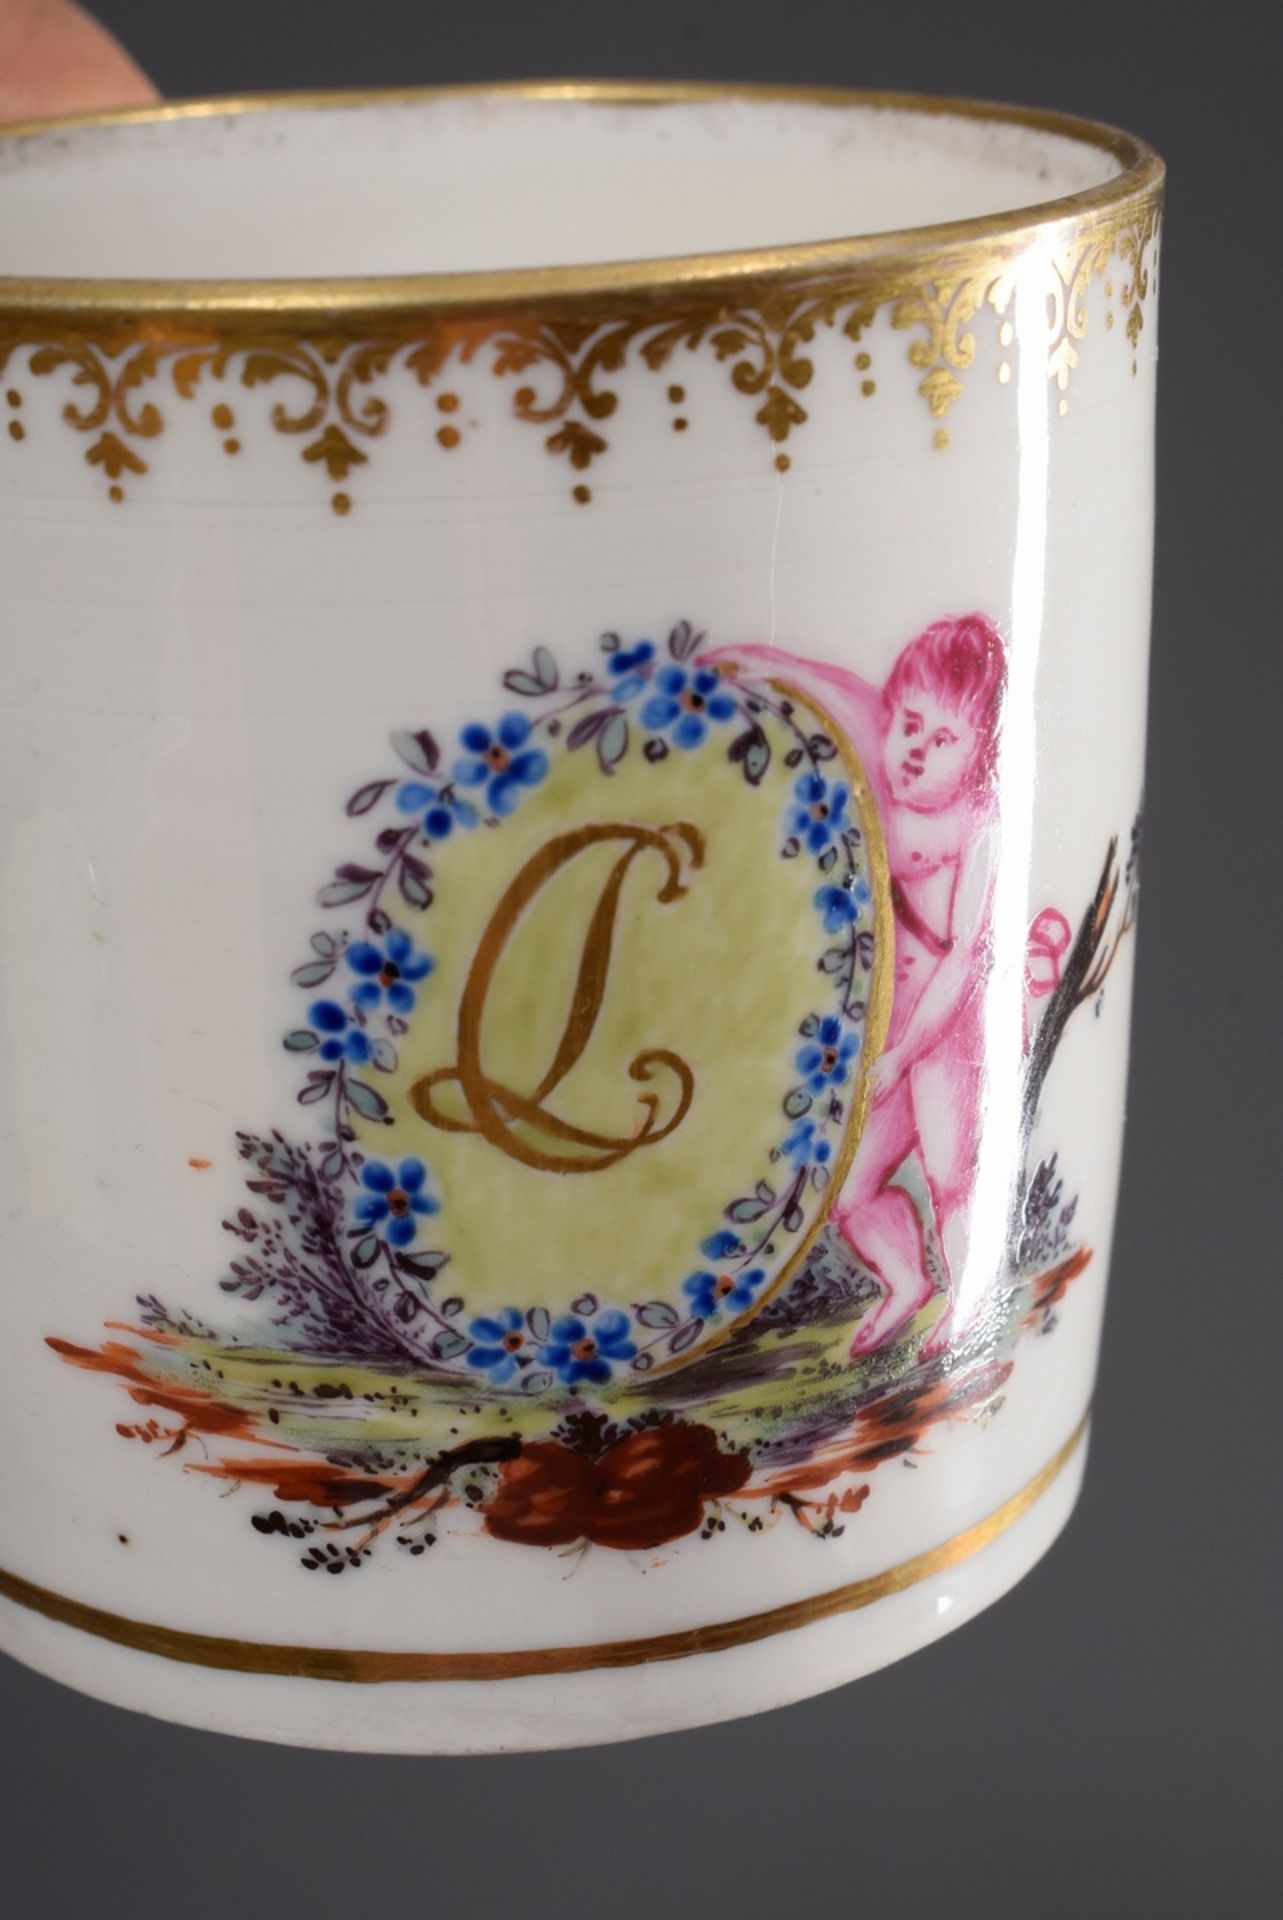 2 Various cylindrical Biedermeier porcelain cups/saucers with polychrome painting "Blossoms" and "P - Image 6 of 9